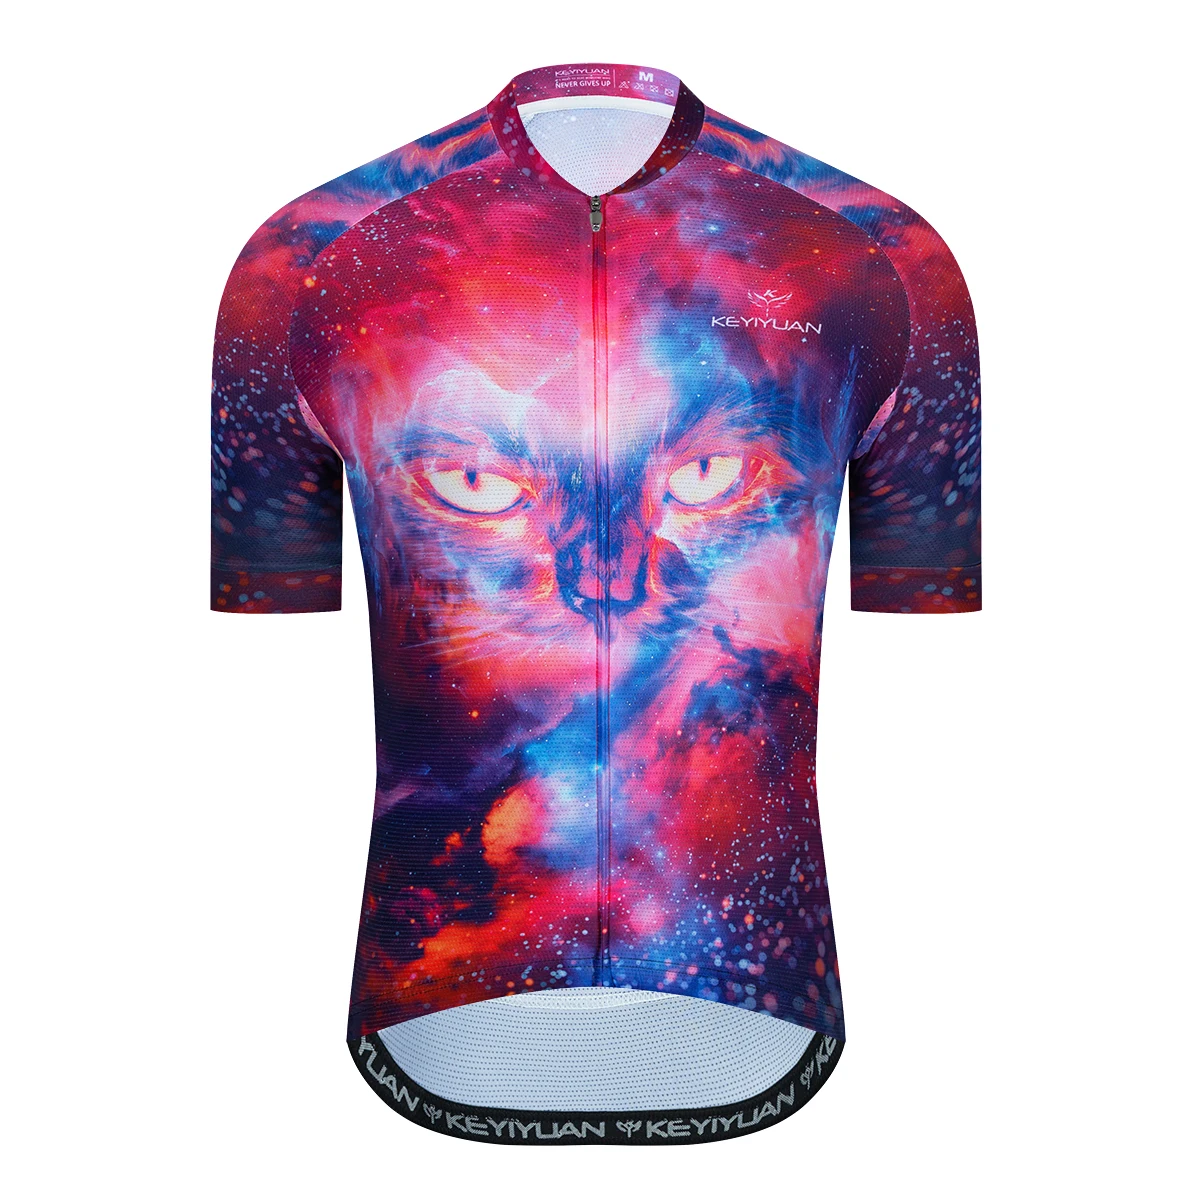 

KEYIYUAN 2023 Pro Team Mountain Bike Clothes Bicycle Cycling Jersey Men MTB Riding Tops Ropa Ciclismo Hombre Verano Maillot Velo